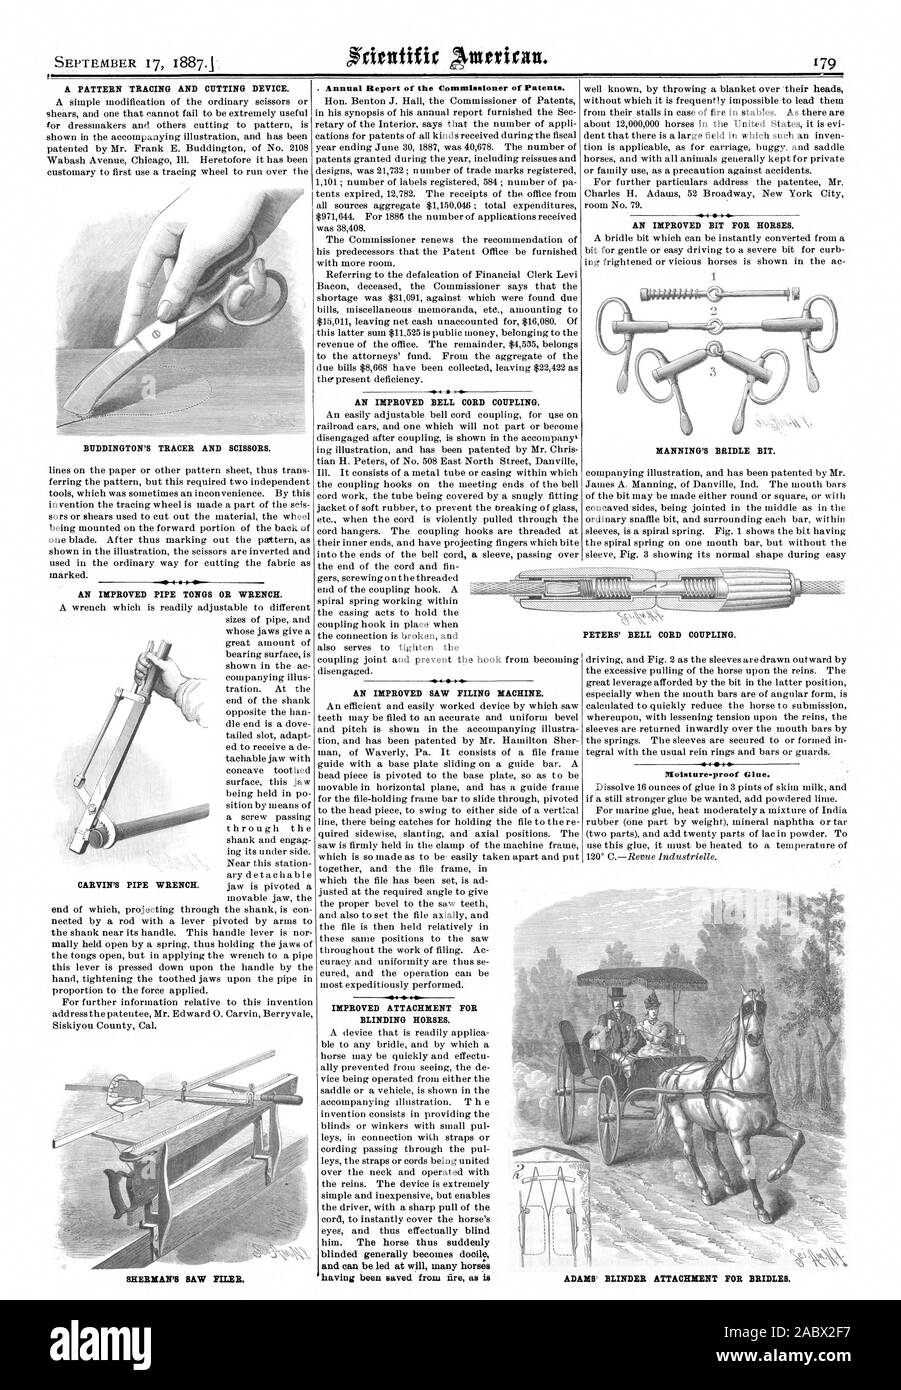 A PATTERN TRACING AND CUTTING DEVICE. BUDDINGTON'S TRACER AND SCISSORS. AN IMPROVED PIPE TONGS OR WRENCH. SHERMAN'S SAW FILER. . Annual Report of the Commissioner of Patents. AN IMPROVED BELL CORD COUPLING. AN IMPROVED SAW FILING MACHINE. IMPROVED ATTACHMENT FOR BLINDING HORSES. and can be led at will many horses having been saved from fire as is AN IMPROVED BIT FOR HORSES. MANNING'S BRIDLE BIT. Moisture-proof Glue. 1 2 CAR VIN'S PIPE WRENCH. Li10 01 PETERS' BELL CORD COUPLING. ADAMS BLINDER ATTACHMENT FOR BRIDLES, scientific american, 1887-09-17 Stock Photo